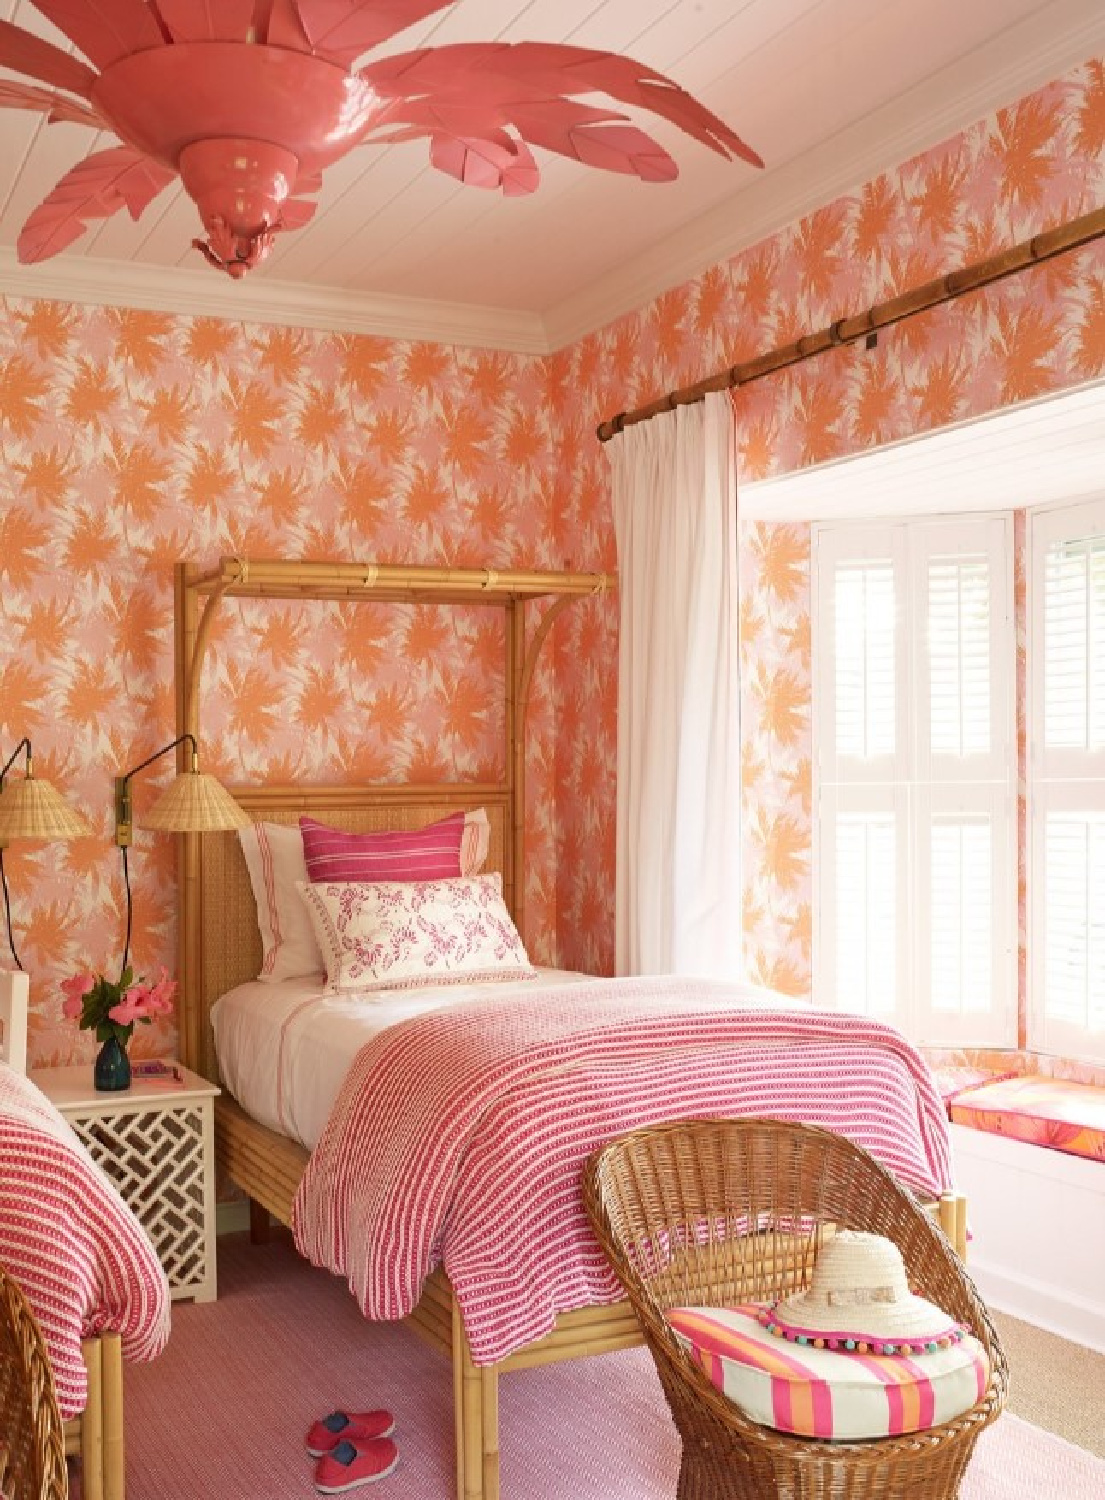 @lindrothdesign - Beautiful coral and pink coastal bedroom. #coastalpink #coastalbedrooms #pinkbedrooms